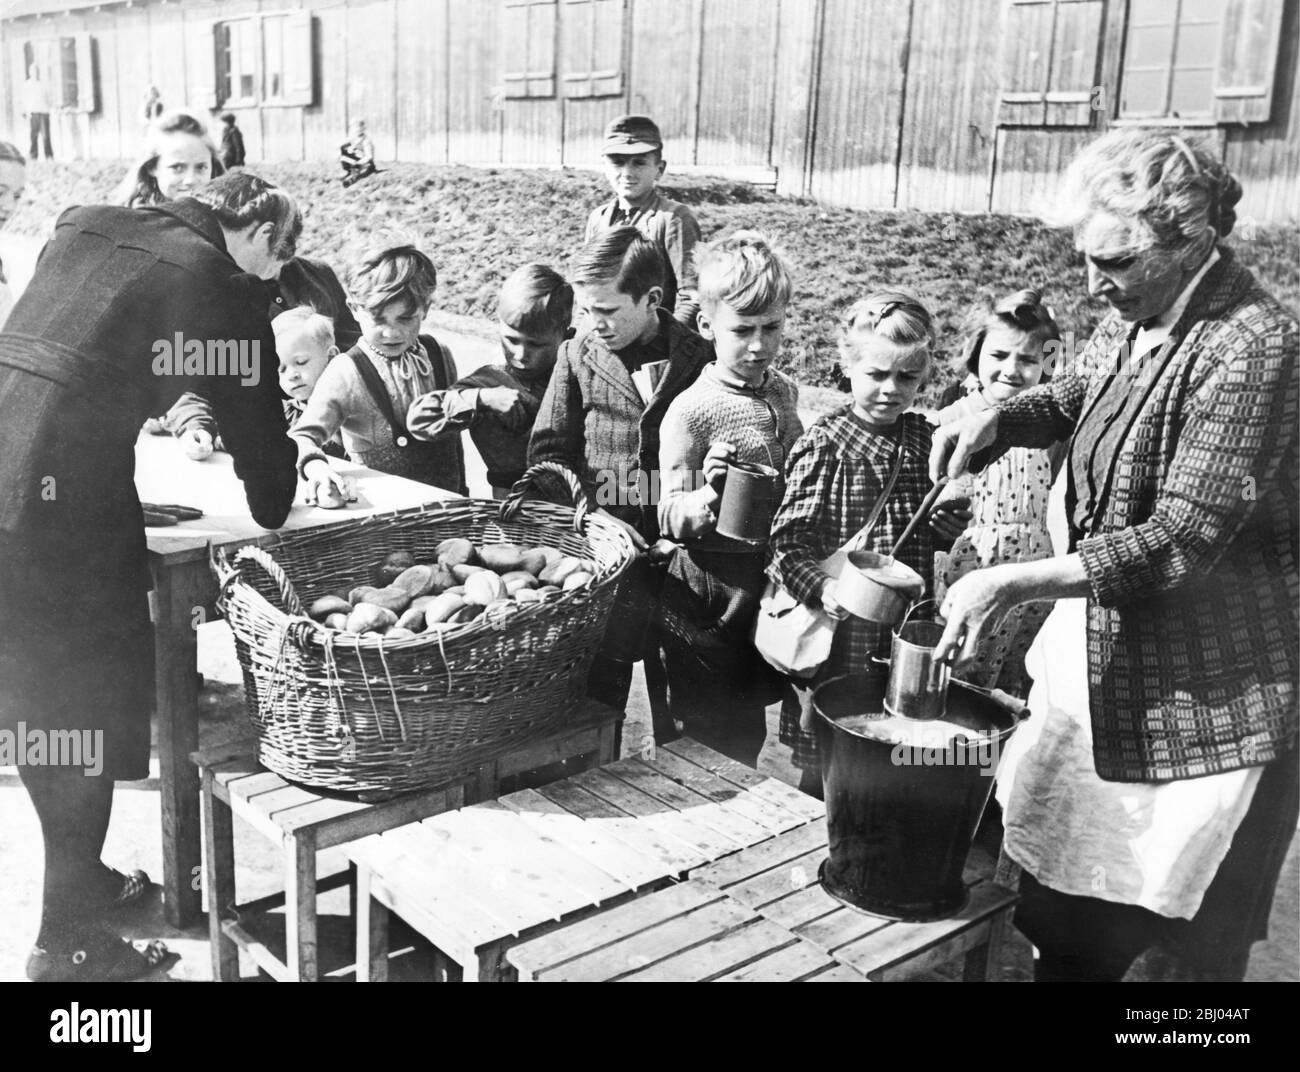 Post war Germany. December 1948 - Hof, Germany. These children get appetizing soup and rolls through the school feeding programme sponsored by Hilfswerk, Protestant Relief Agency. These youngsters belong to families expelled from Eastern Europe because they are German. Stock Photo